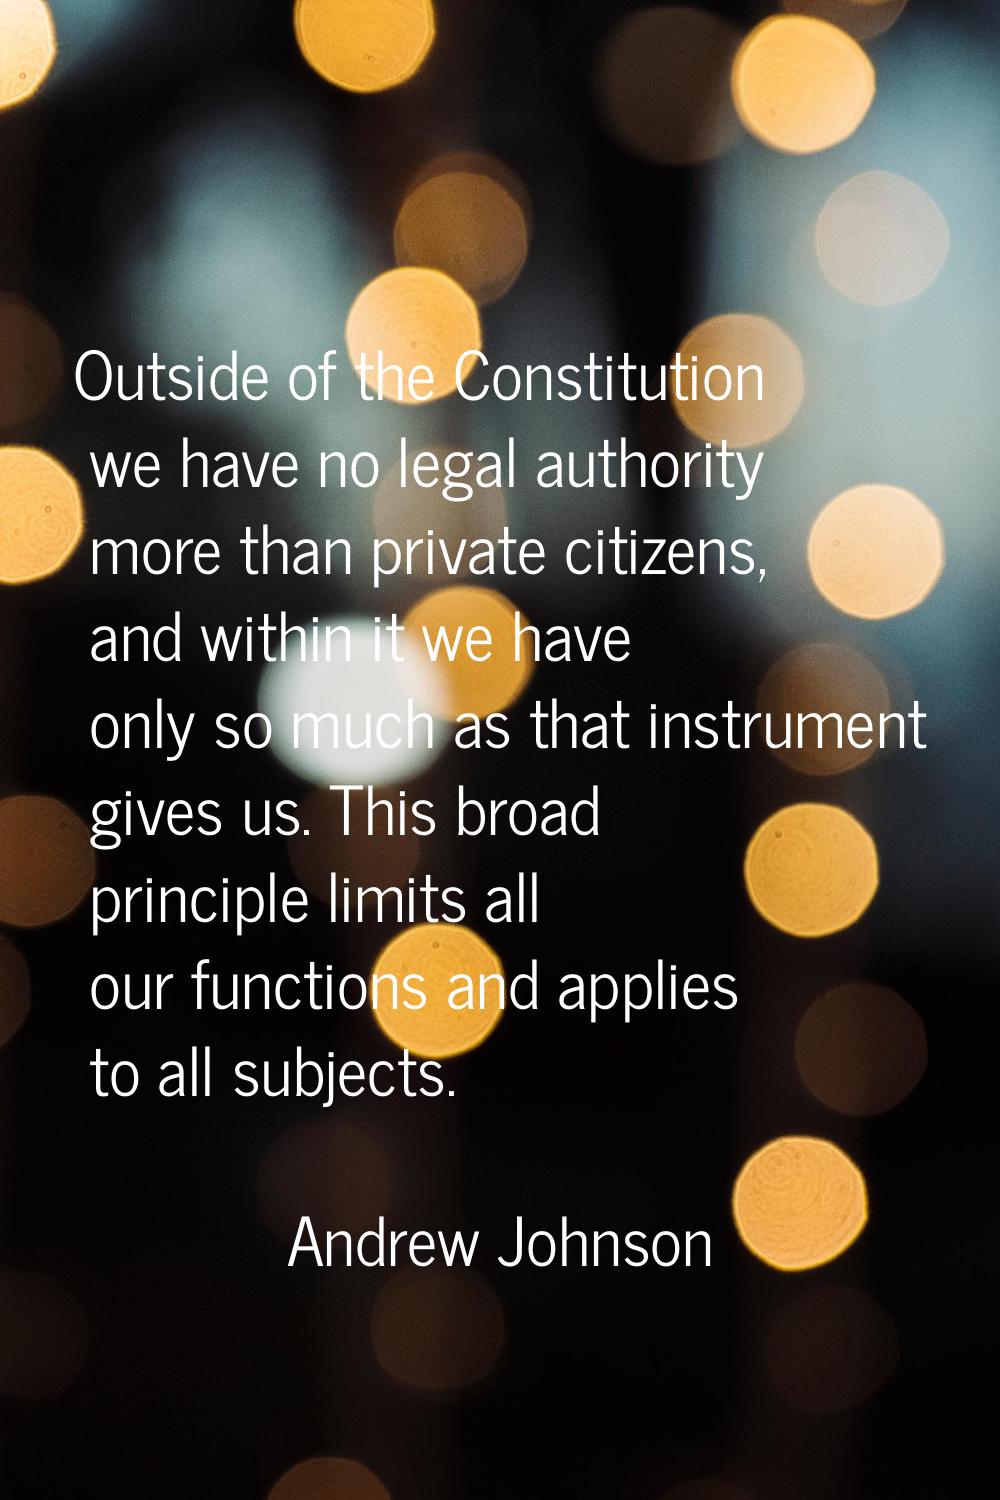 Outside of the Constitution we have no legal authority more than private citizens, and within it we